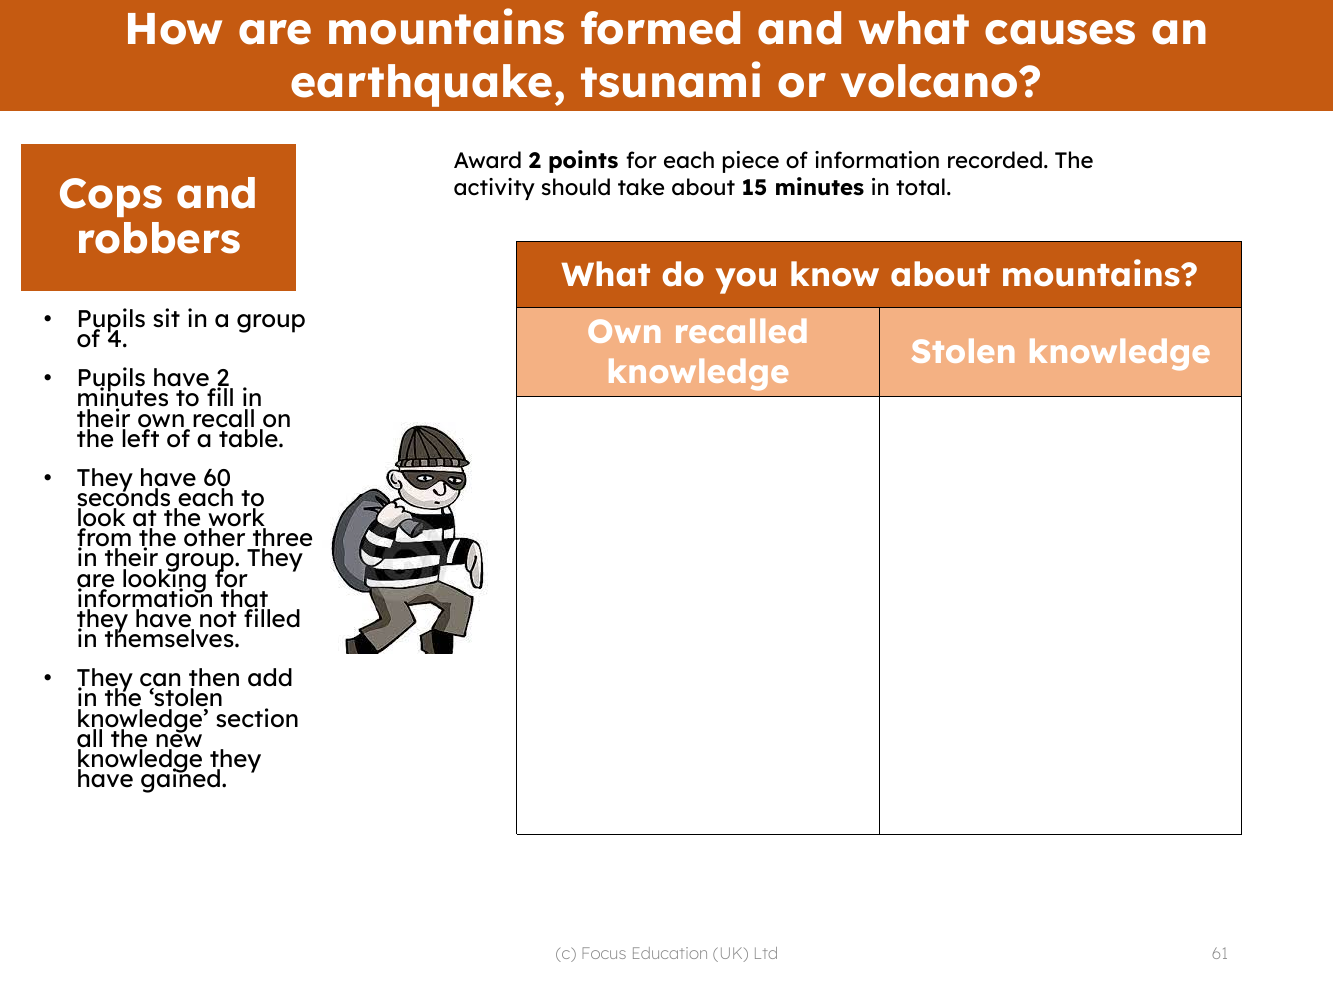 Cops and robbers - What do you know about mountains?